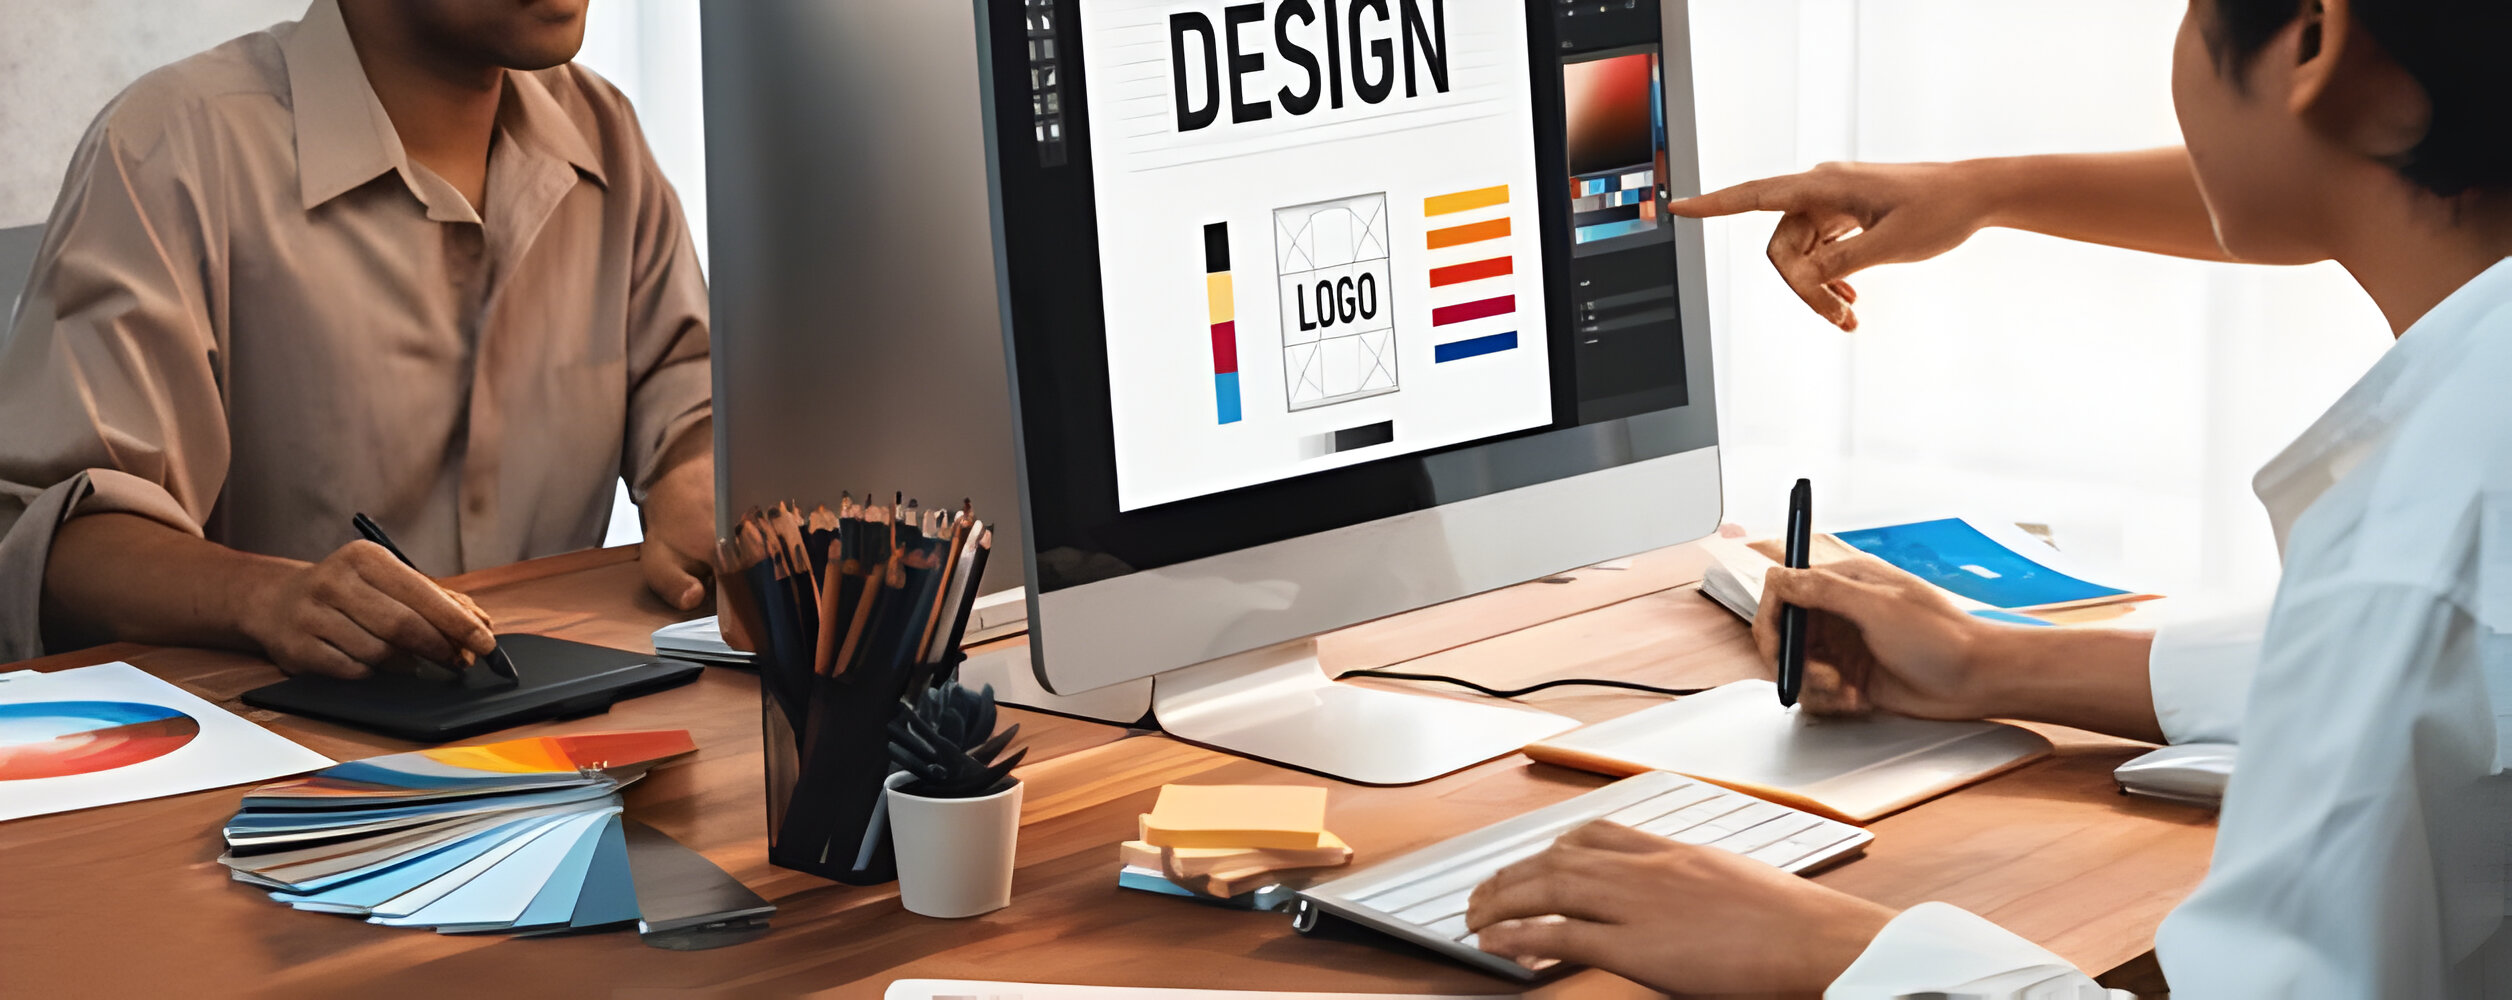 graphic design and marketing courses